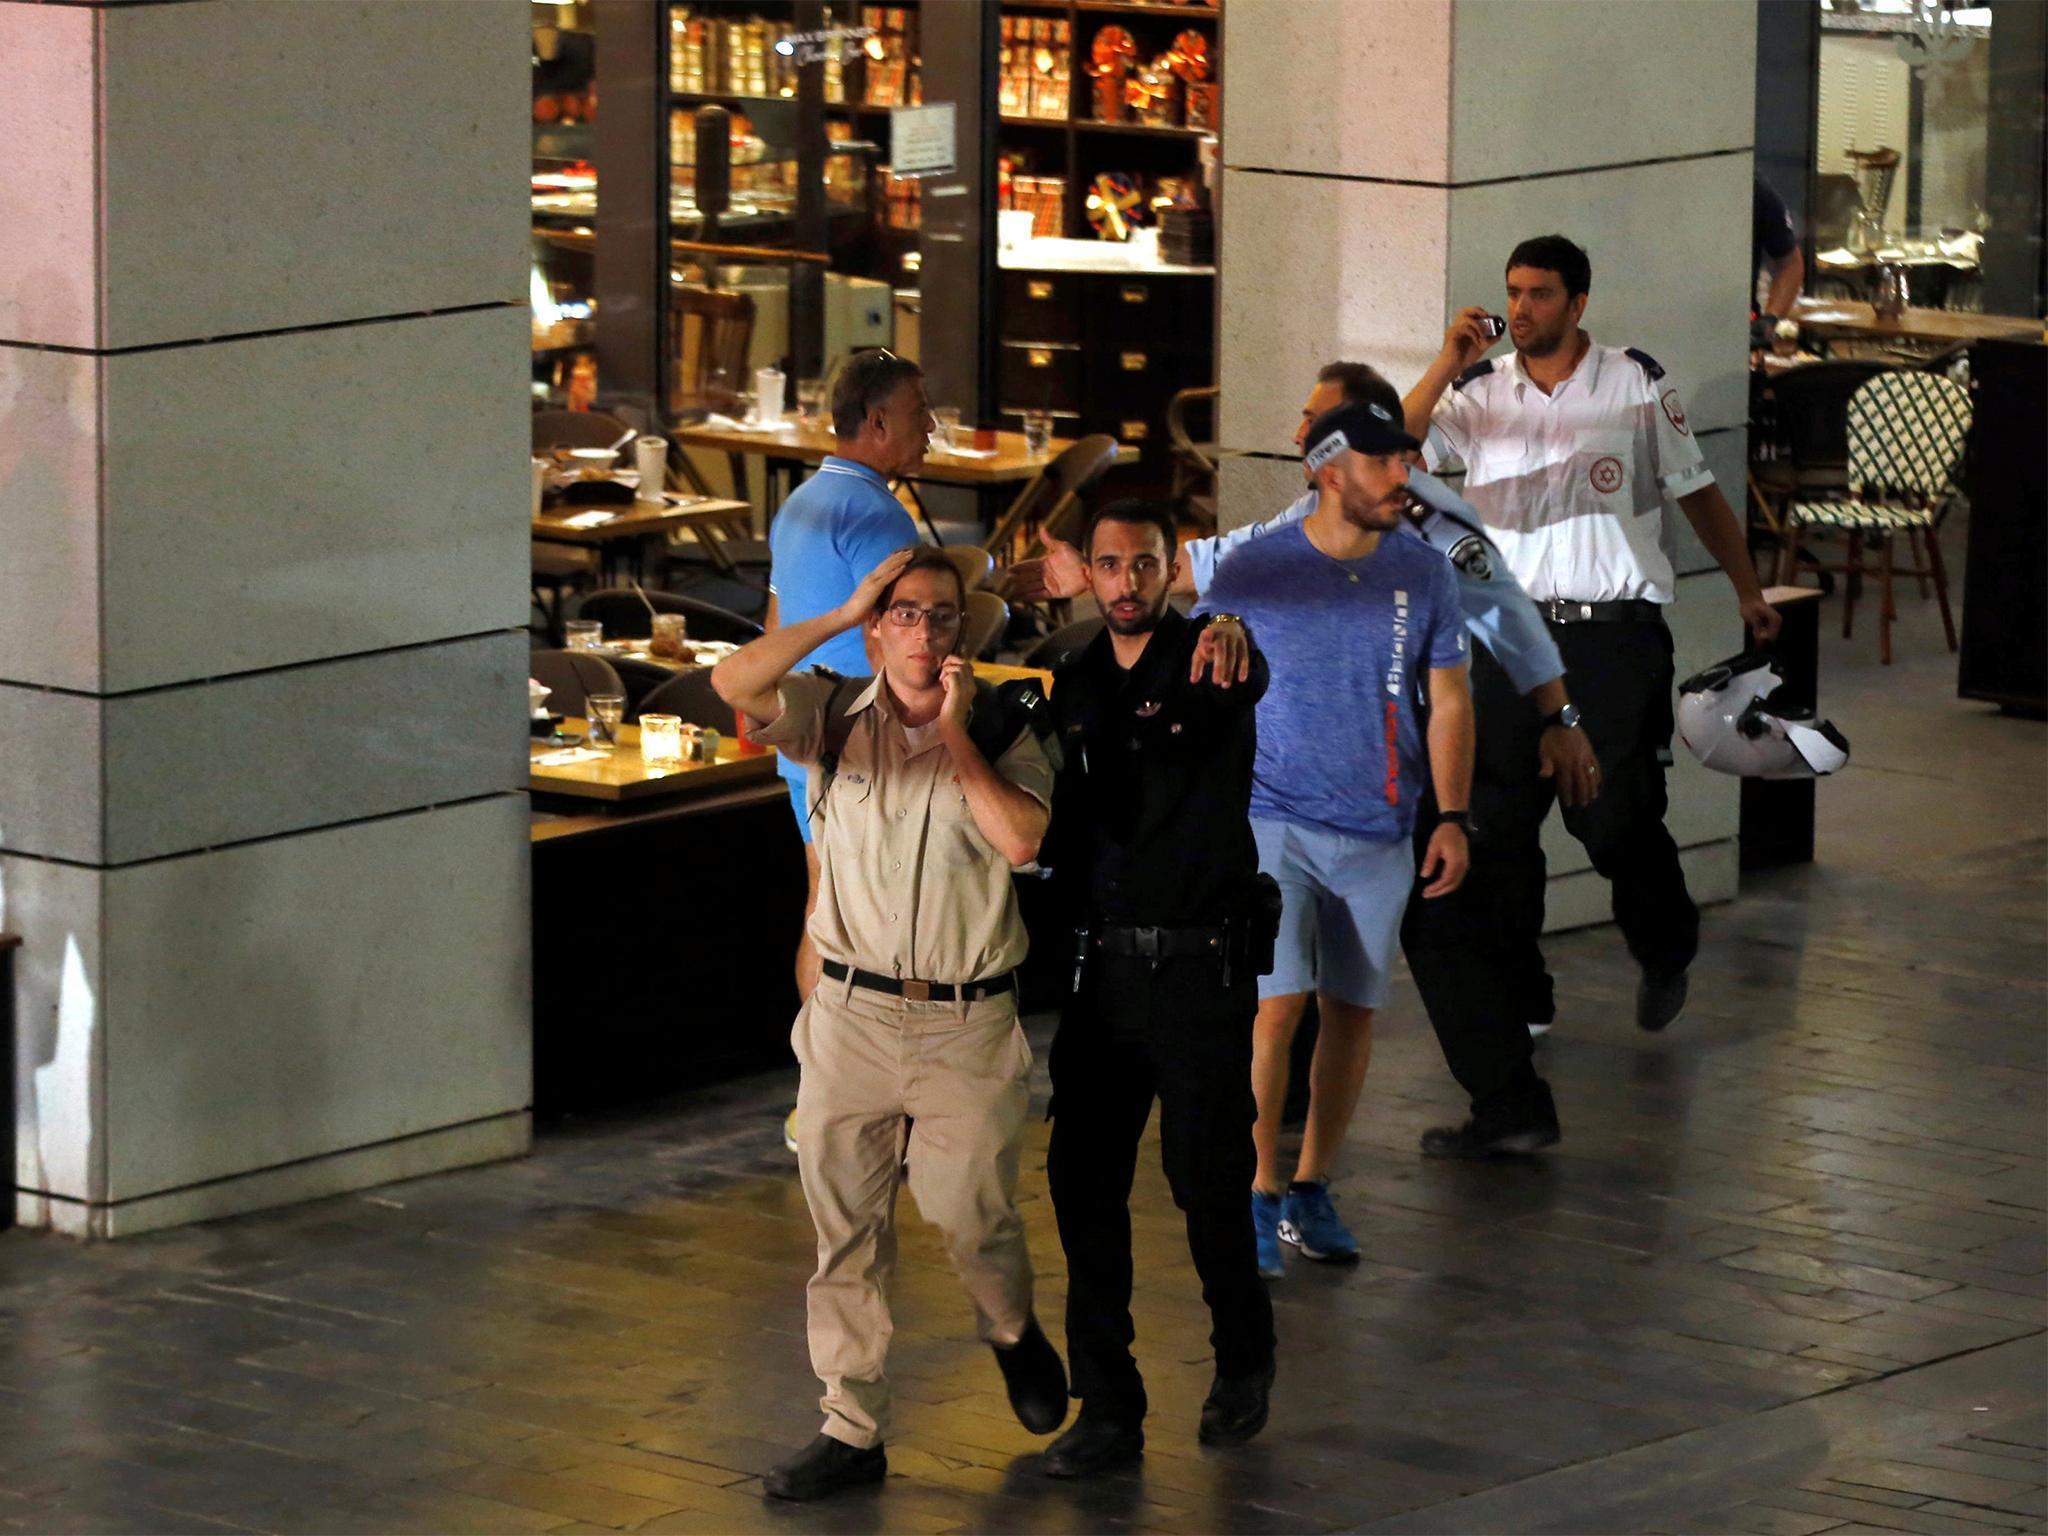 Police clear the scene after a shooting took place in central Tel Aviv.